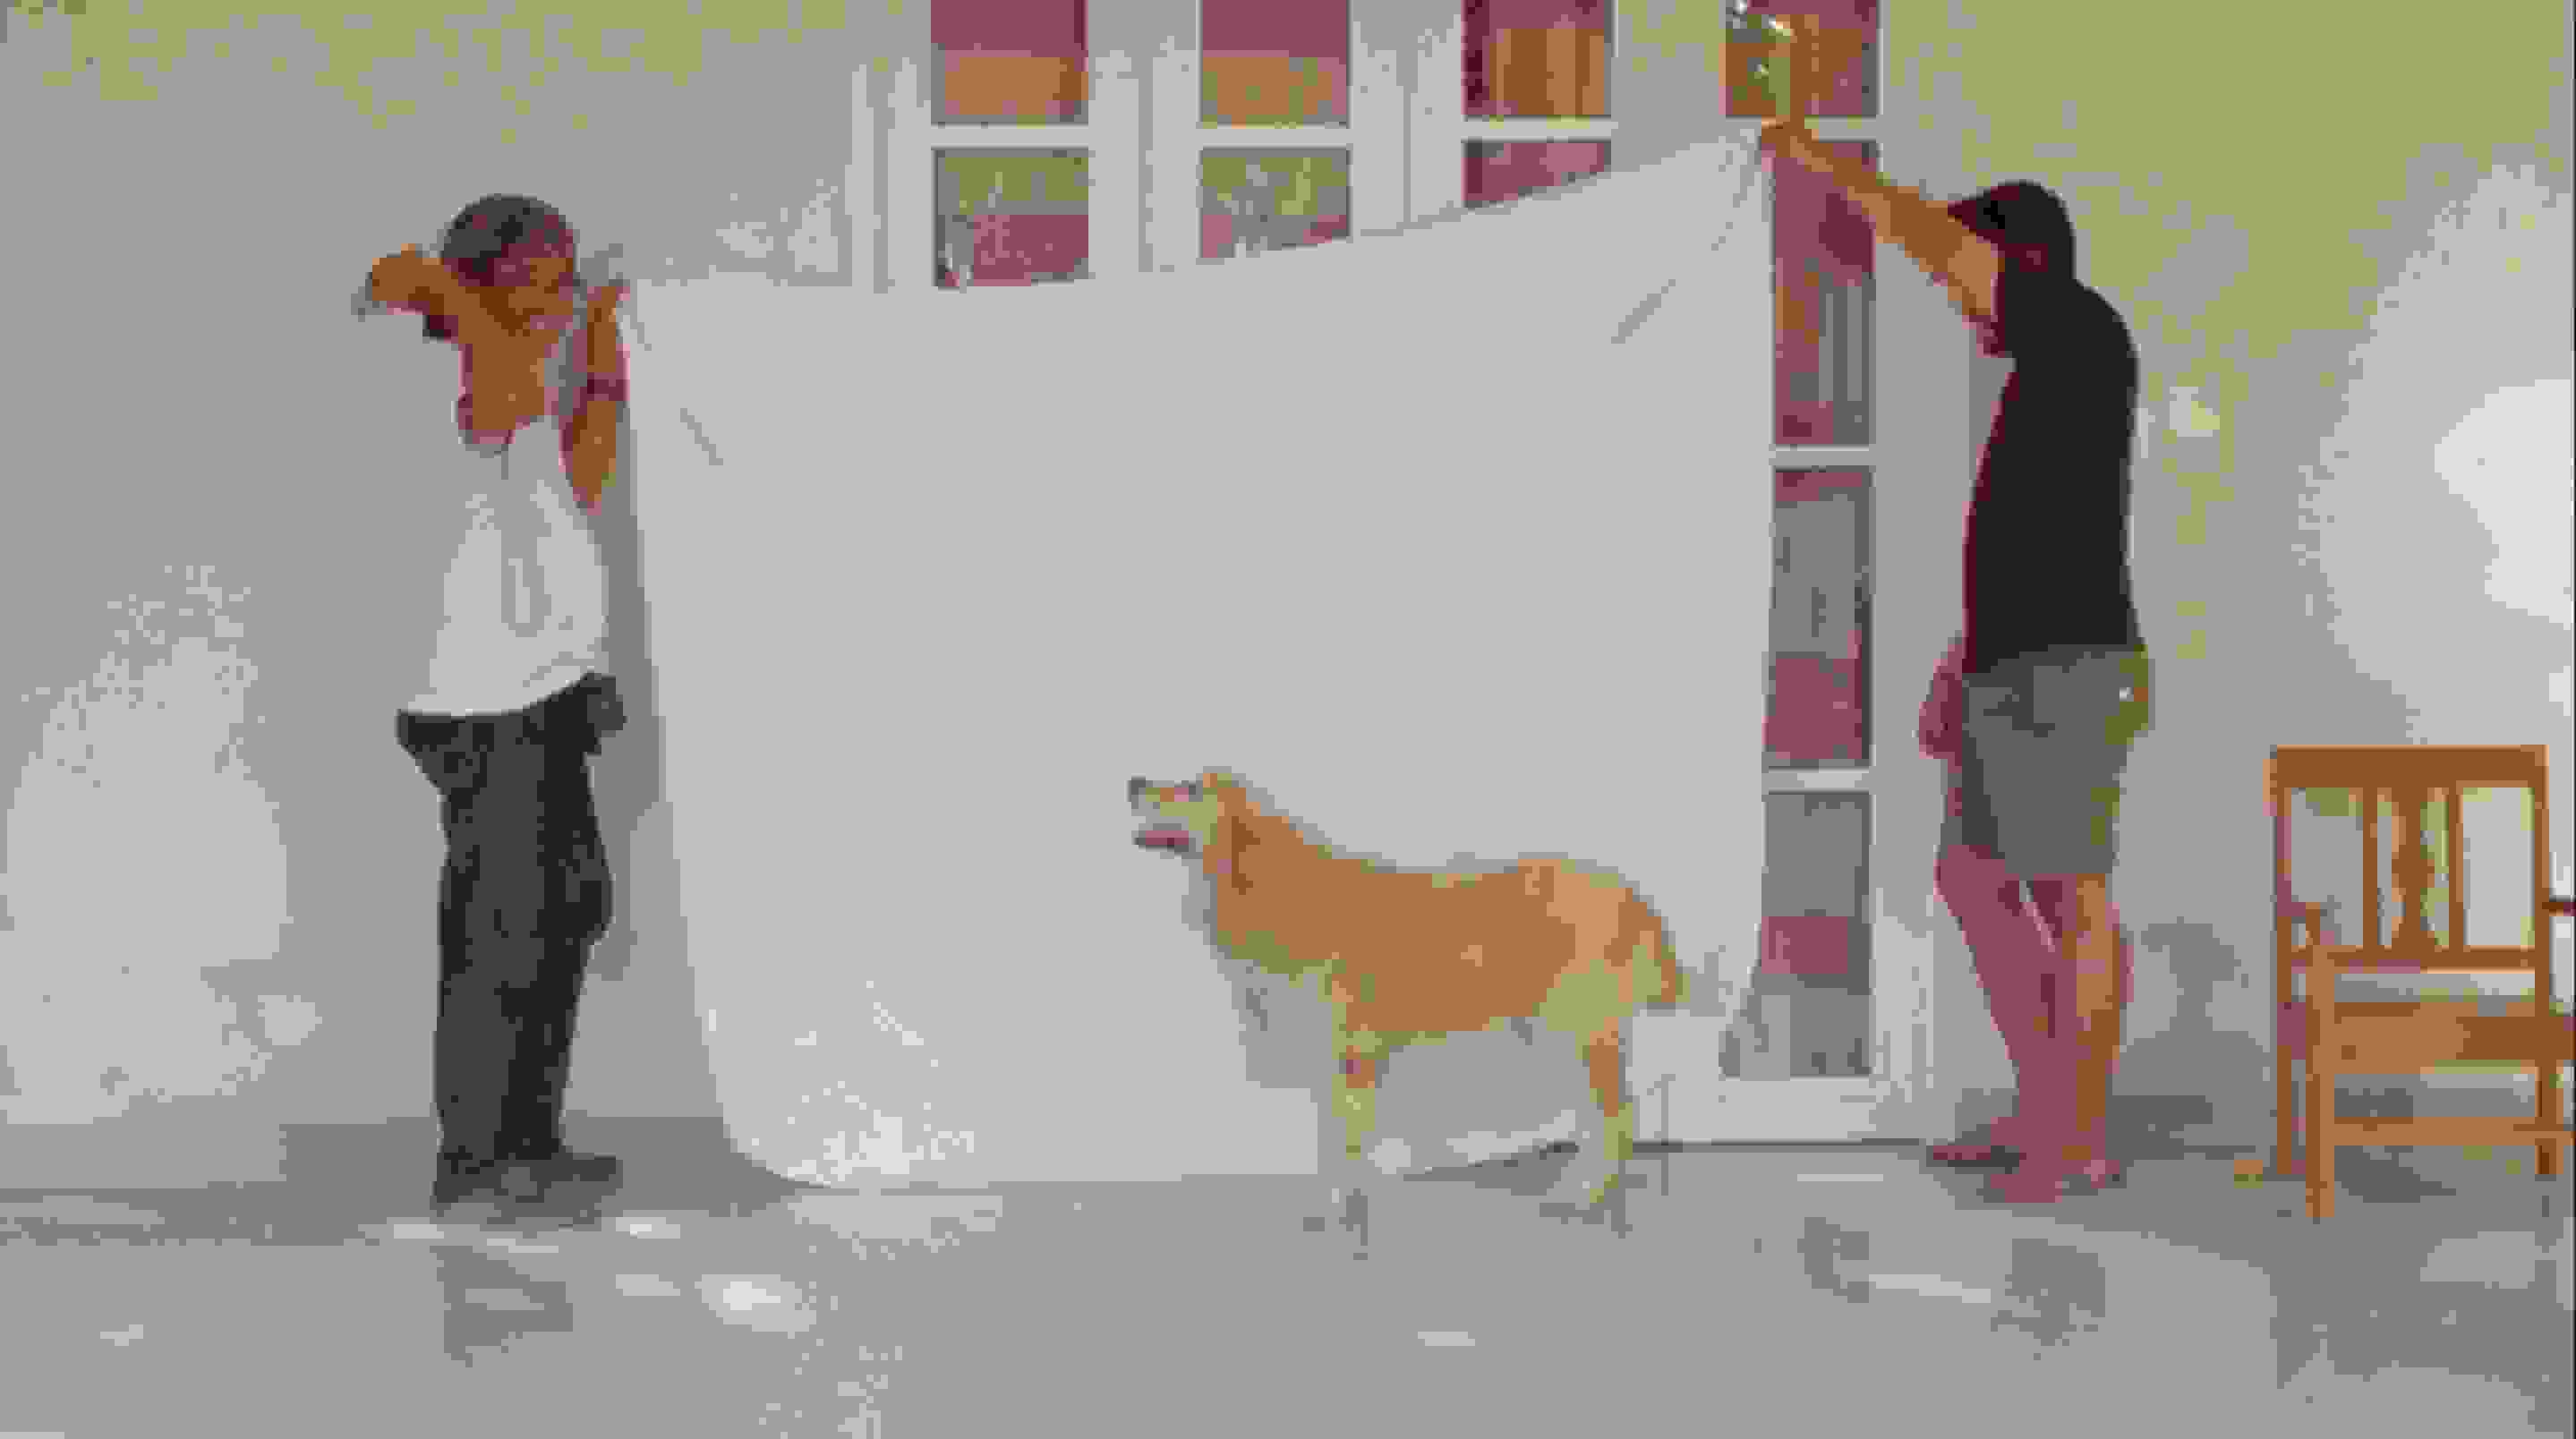 Two men stand in front of French doors in a white wall, and hold a white sheet up like a backdrop behind a golden retriever dog.